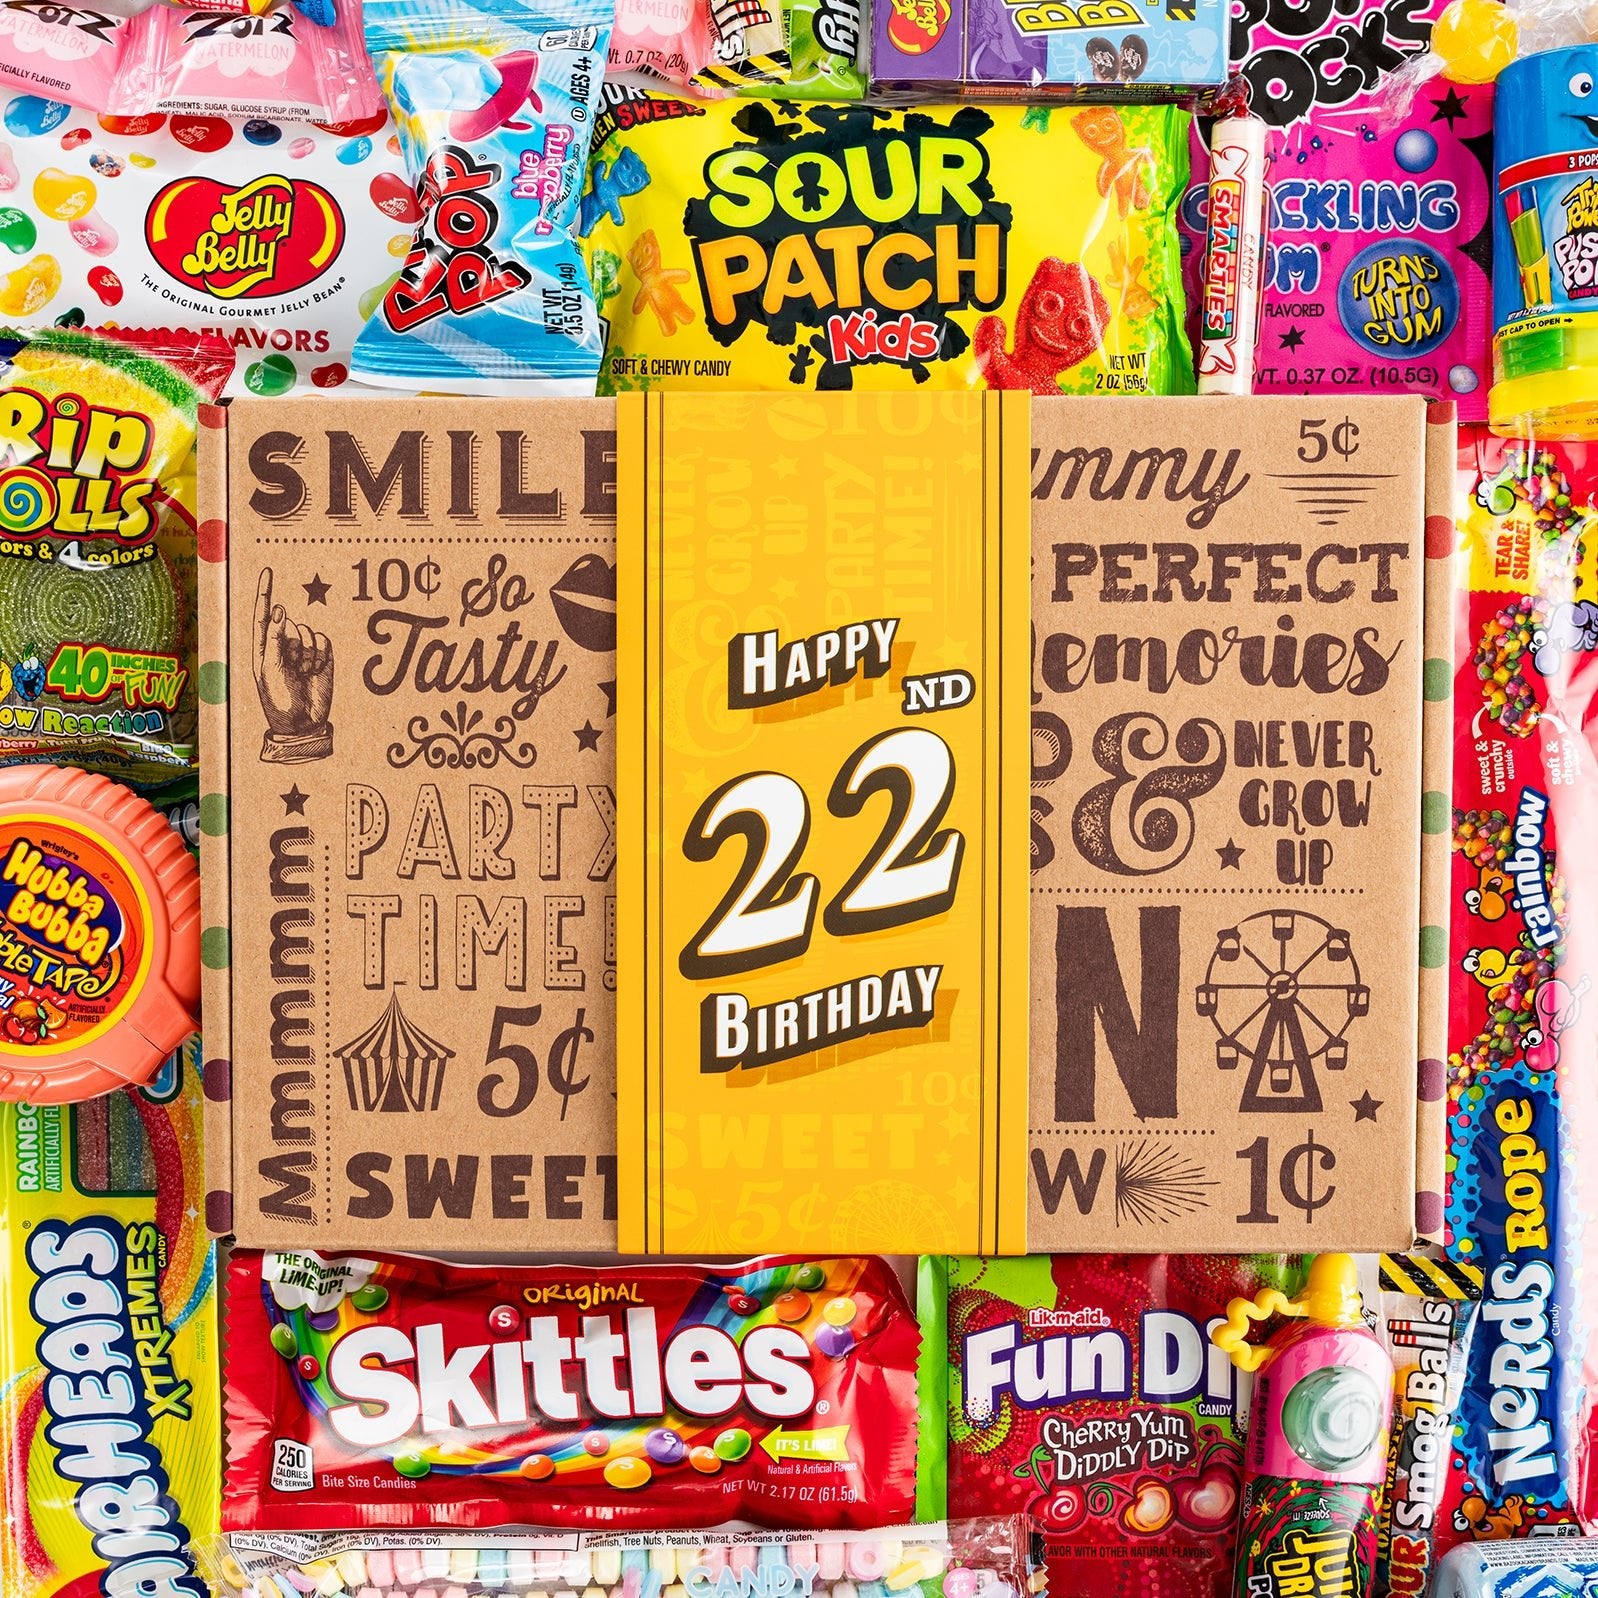 22nd Birthday Retro Candy Gift - Vintage Candy Co.